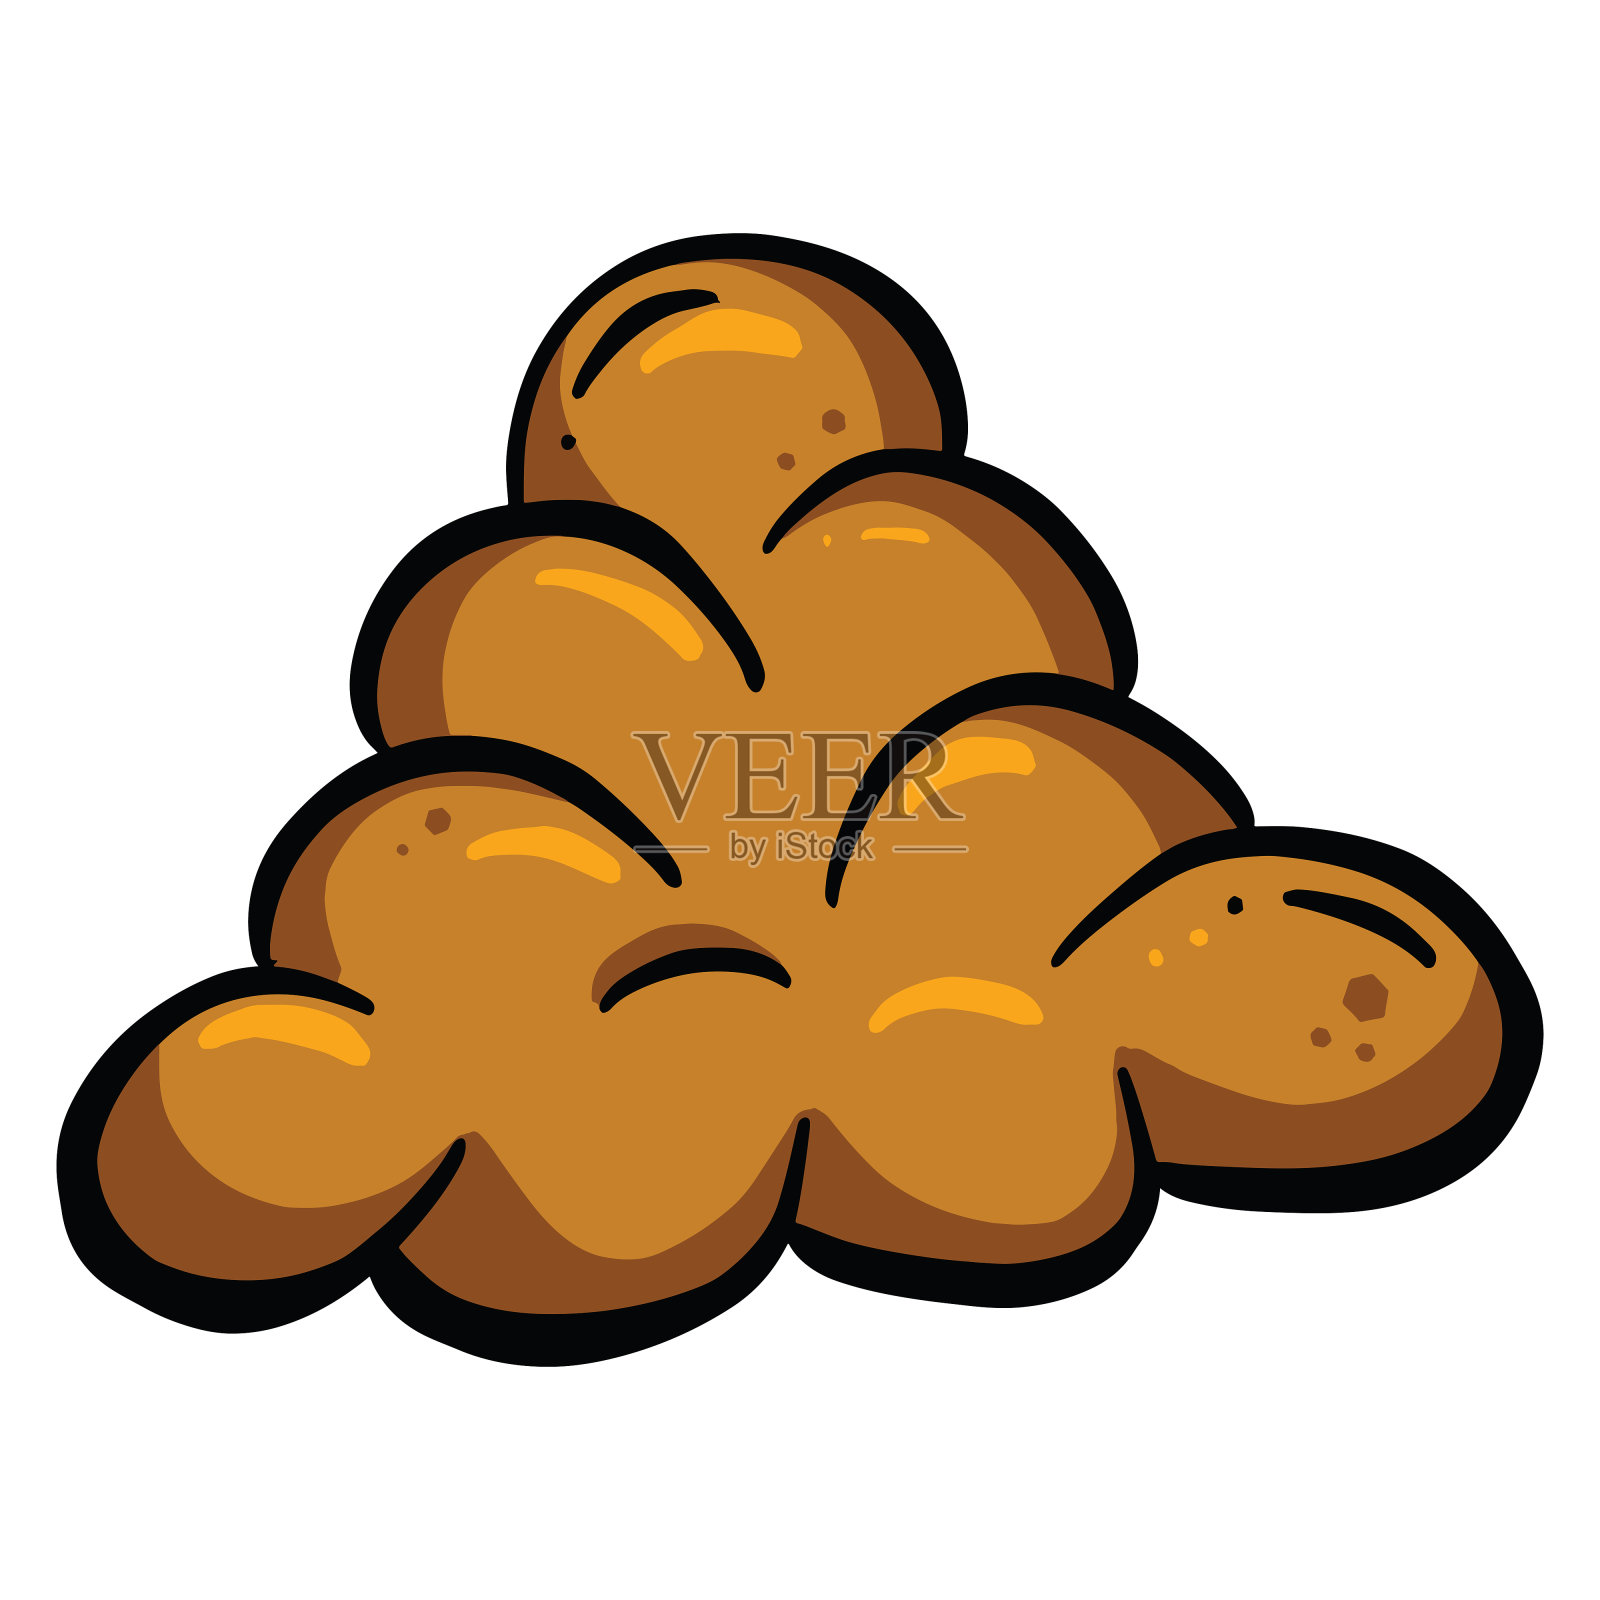 Feces Poo Stink · Free vector graphic on Pixabay